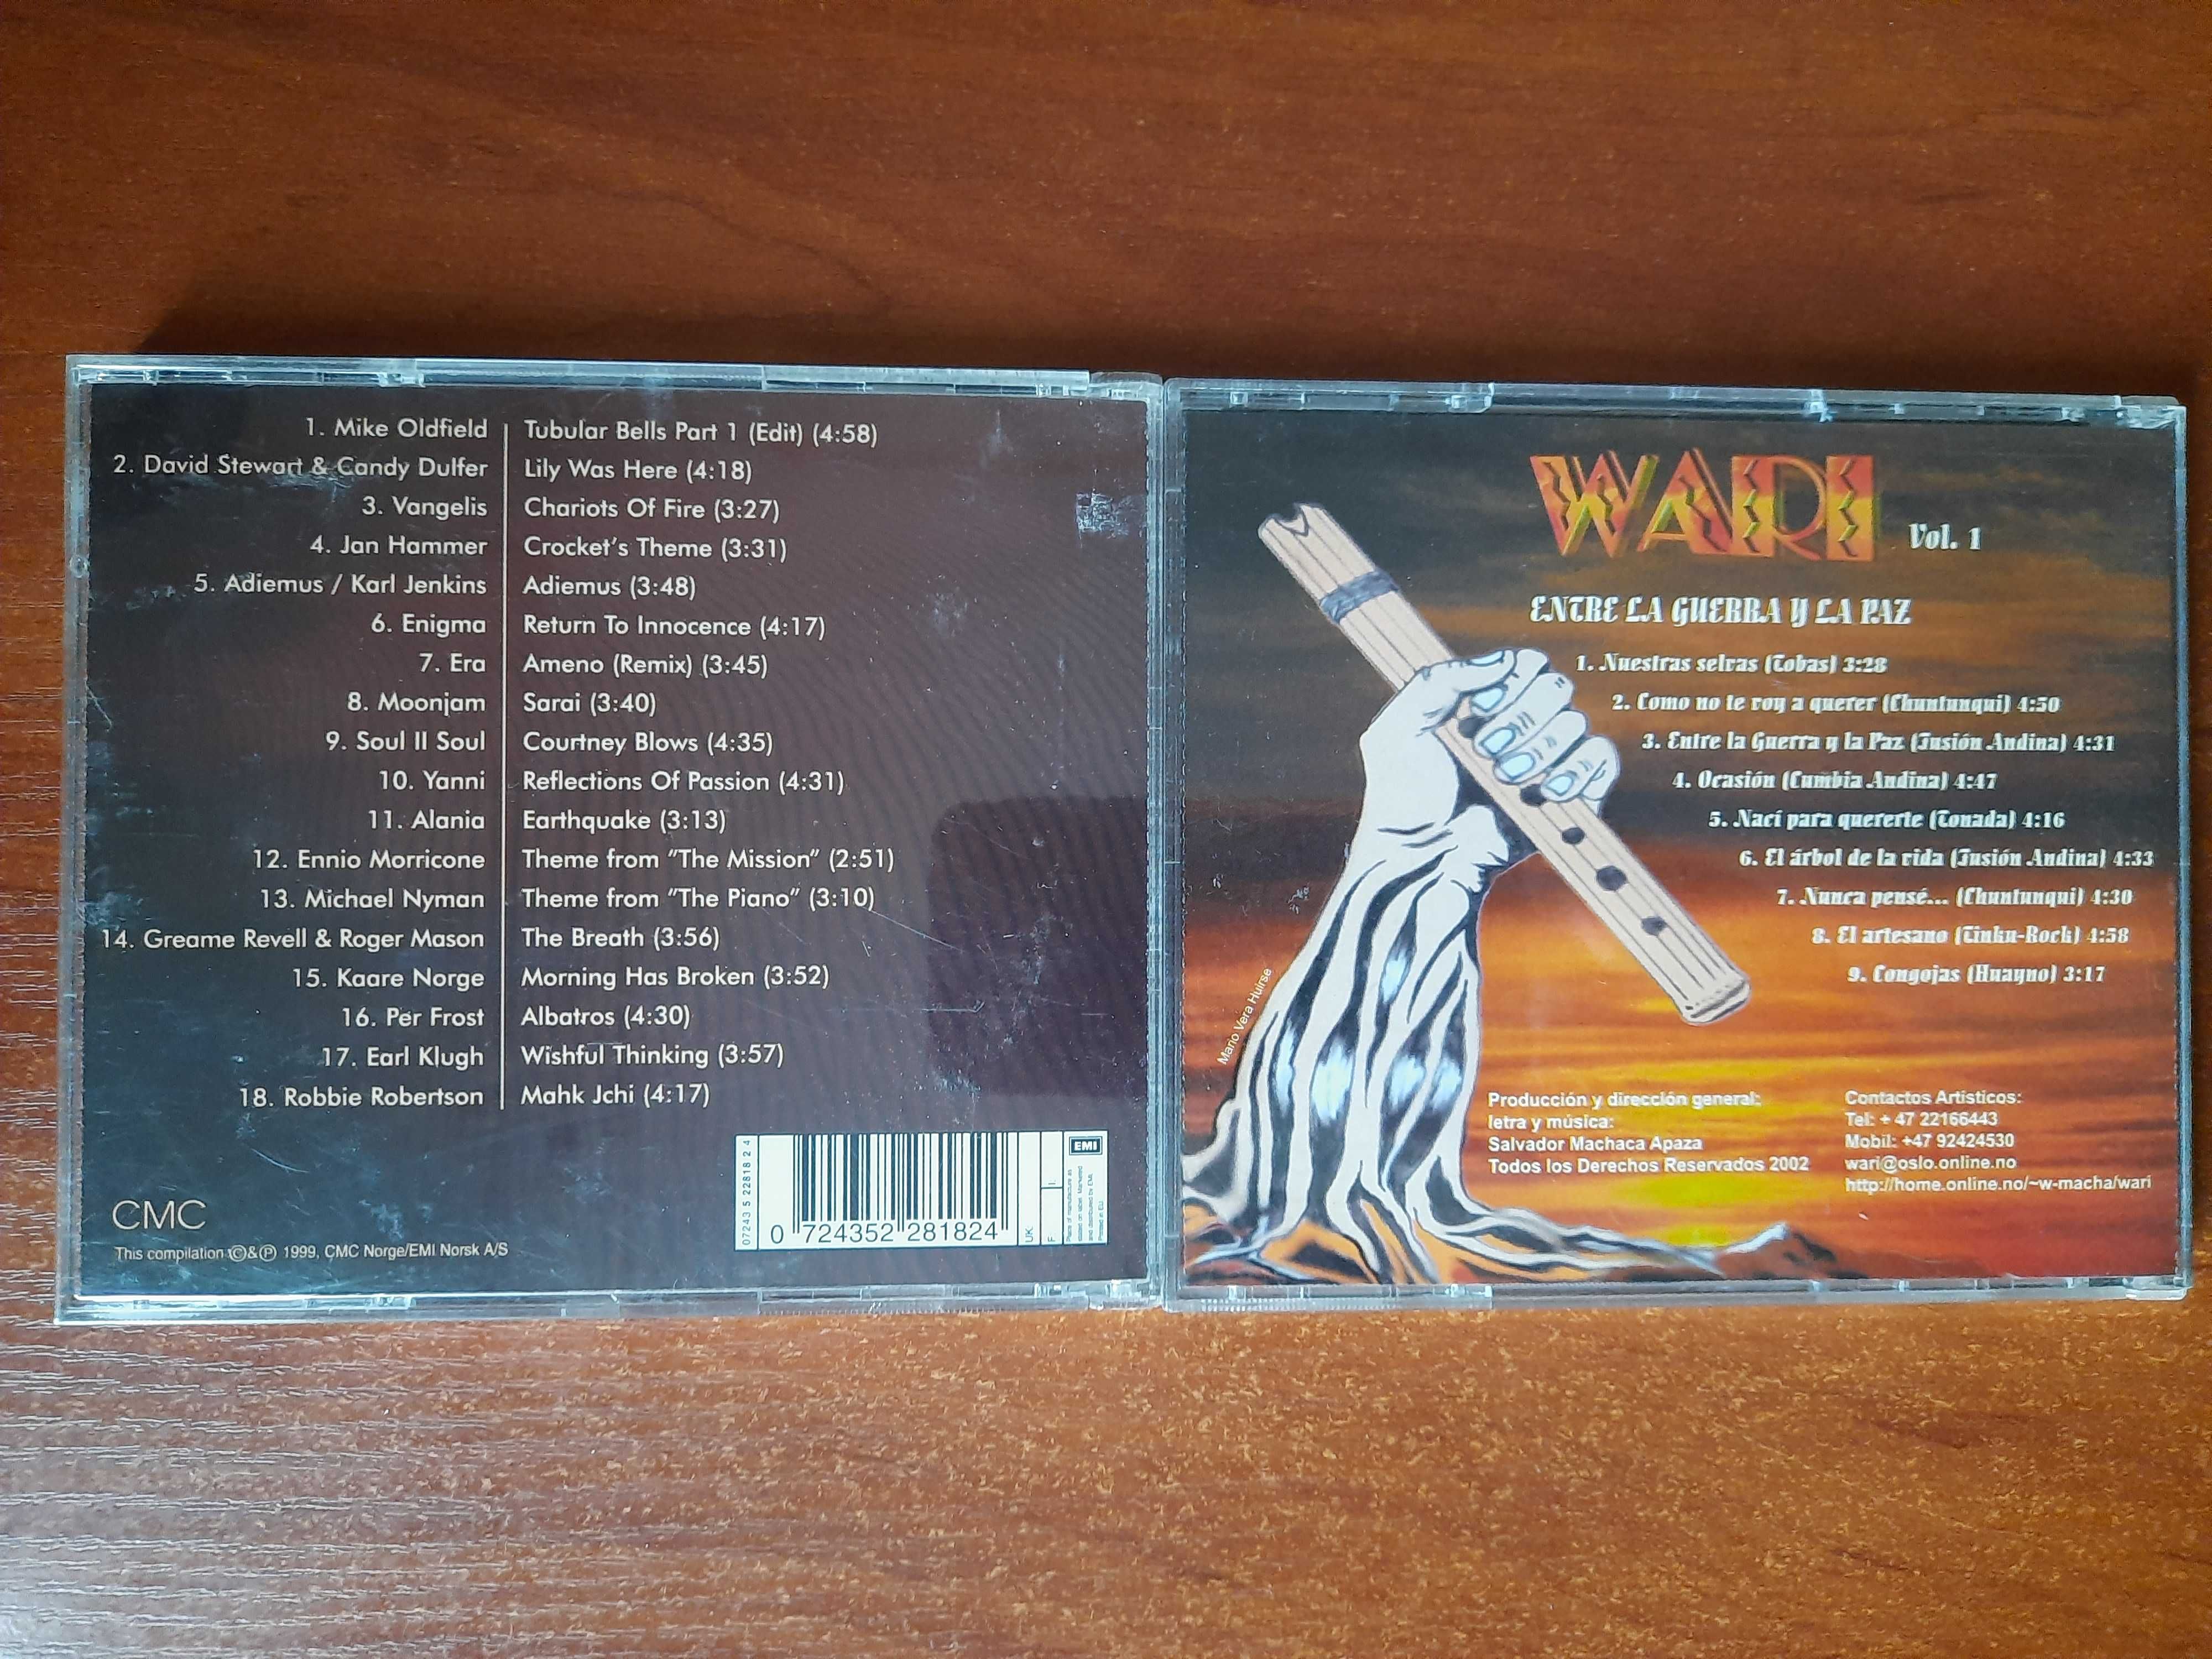 CD (audio) Compilation. Relax.